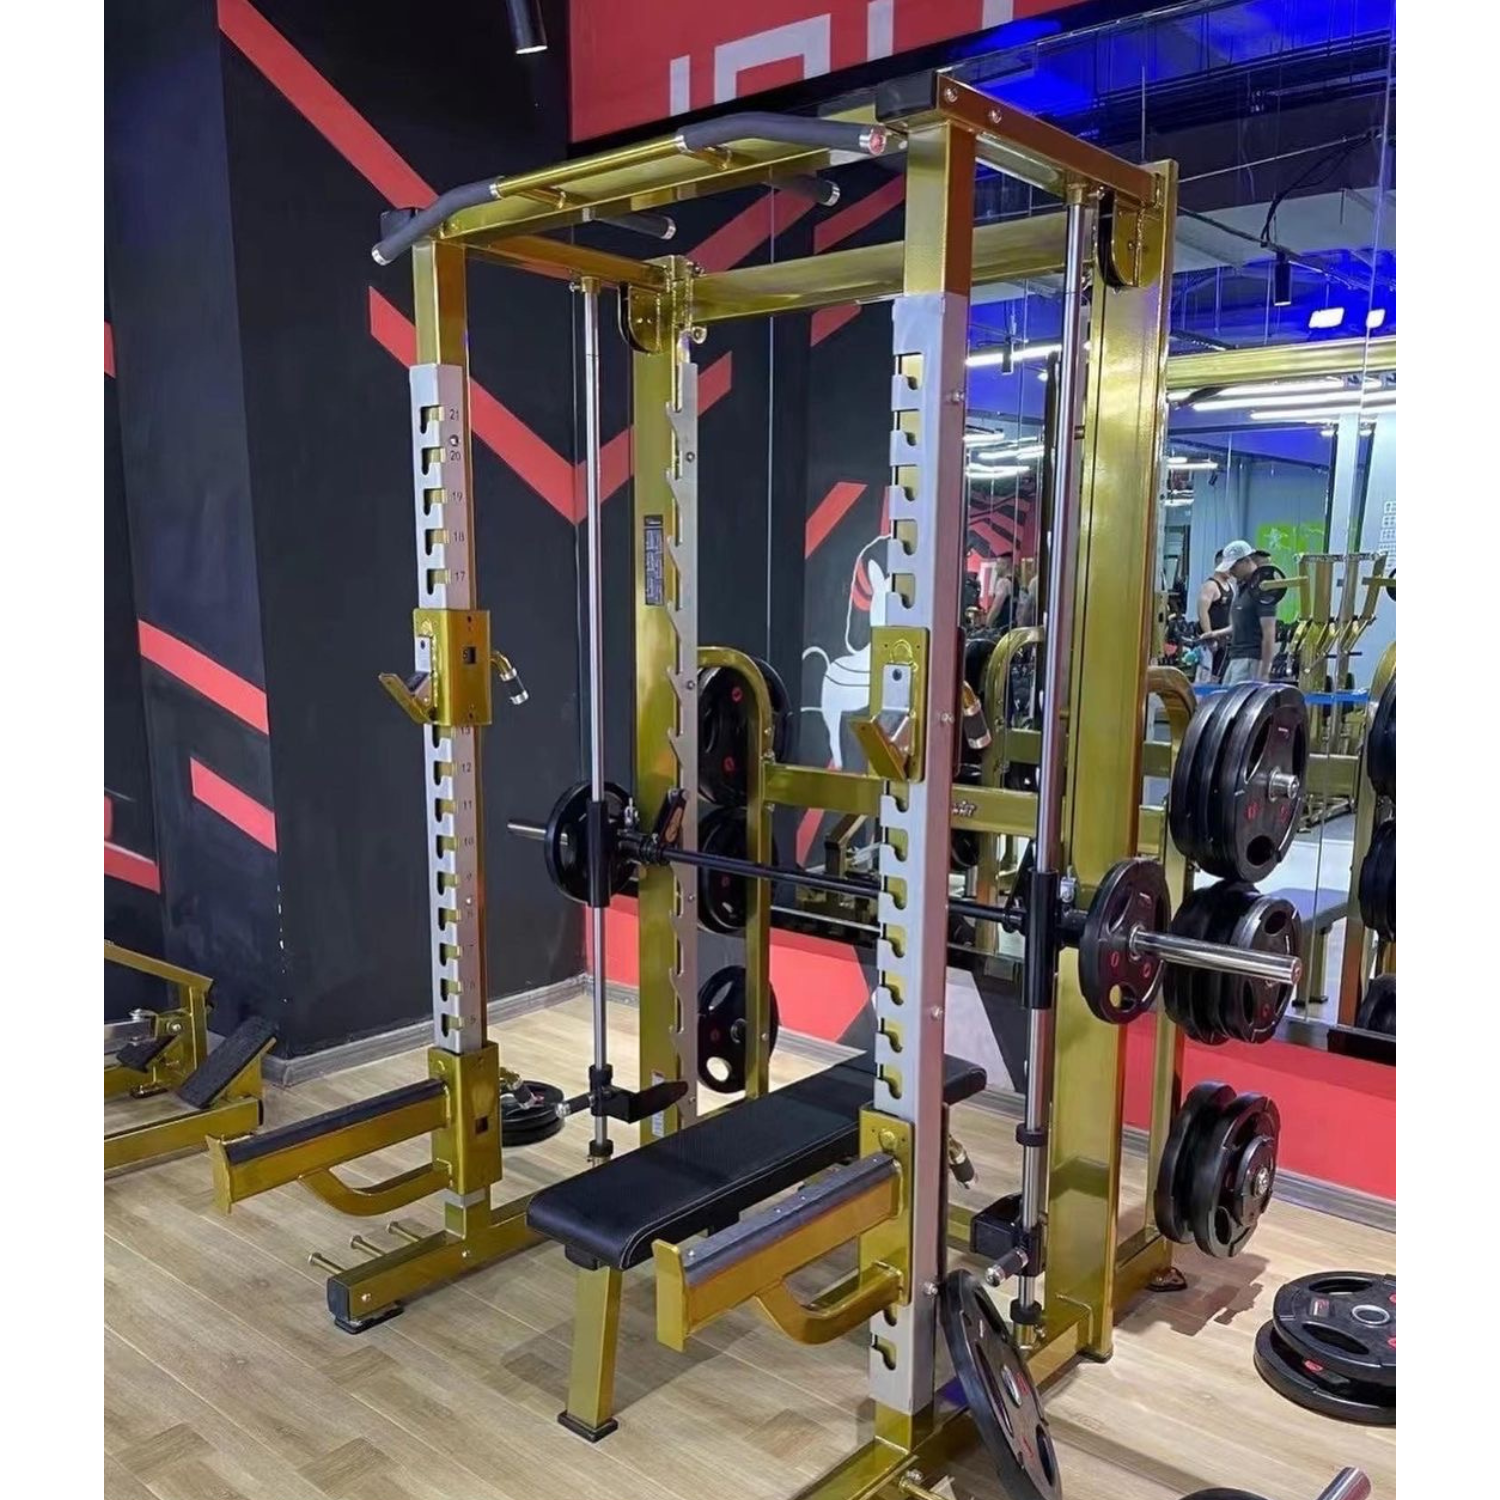 Realleader USA XRHS1027C Commercial counter -balance Smith Machine Squat Rack Combo-Gym Direct